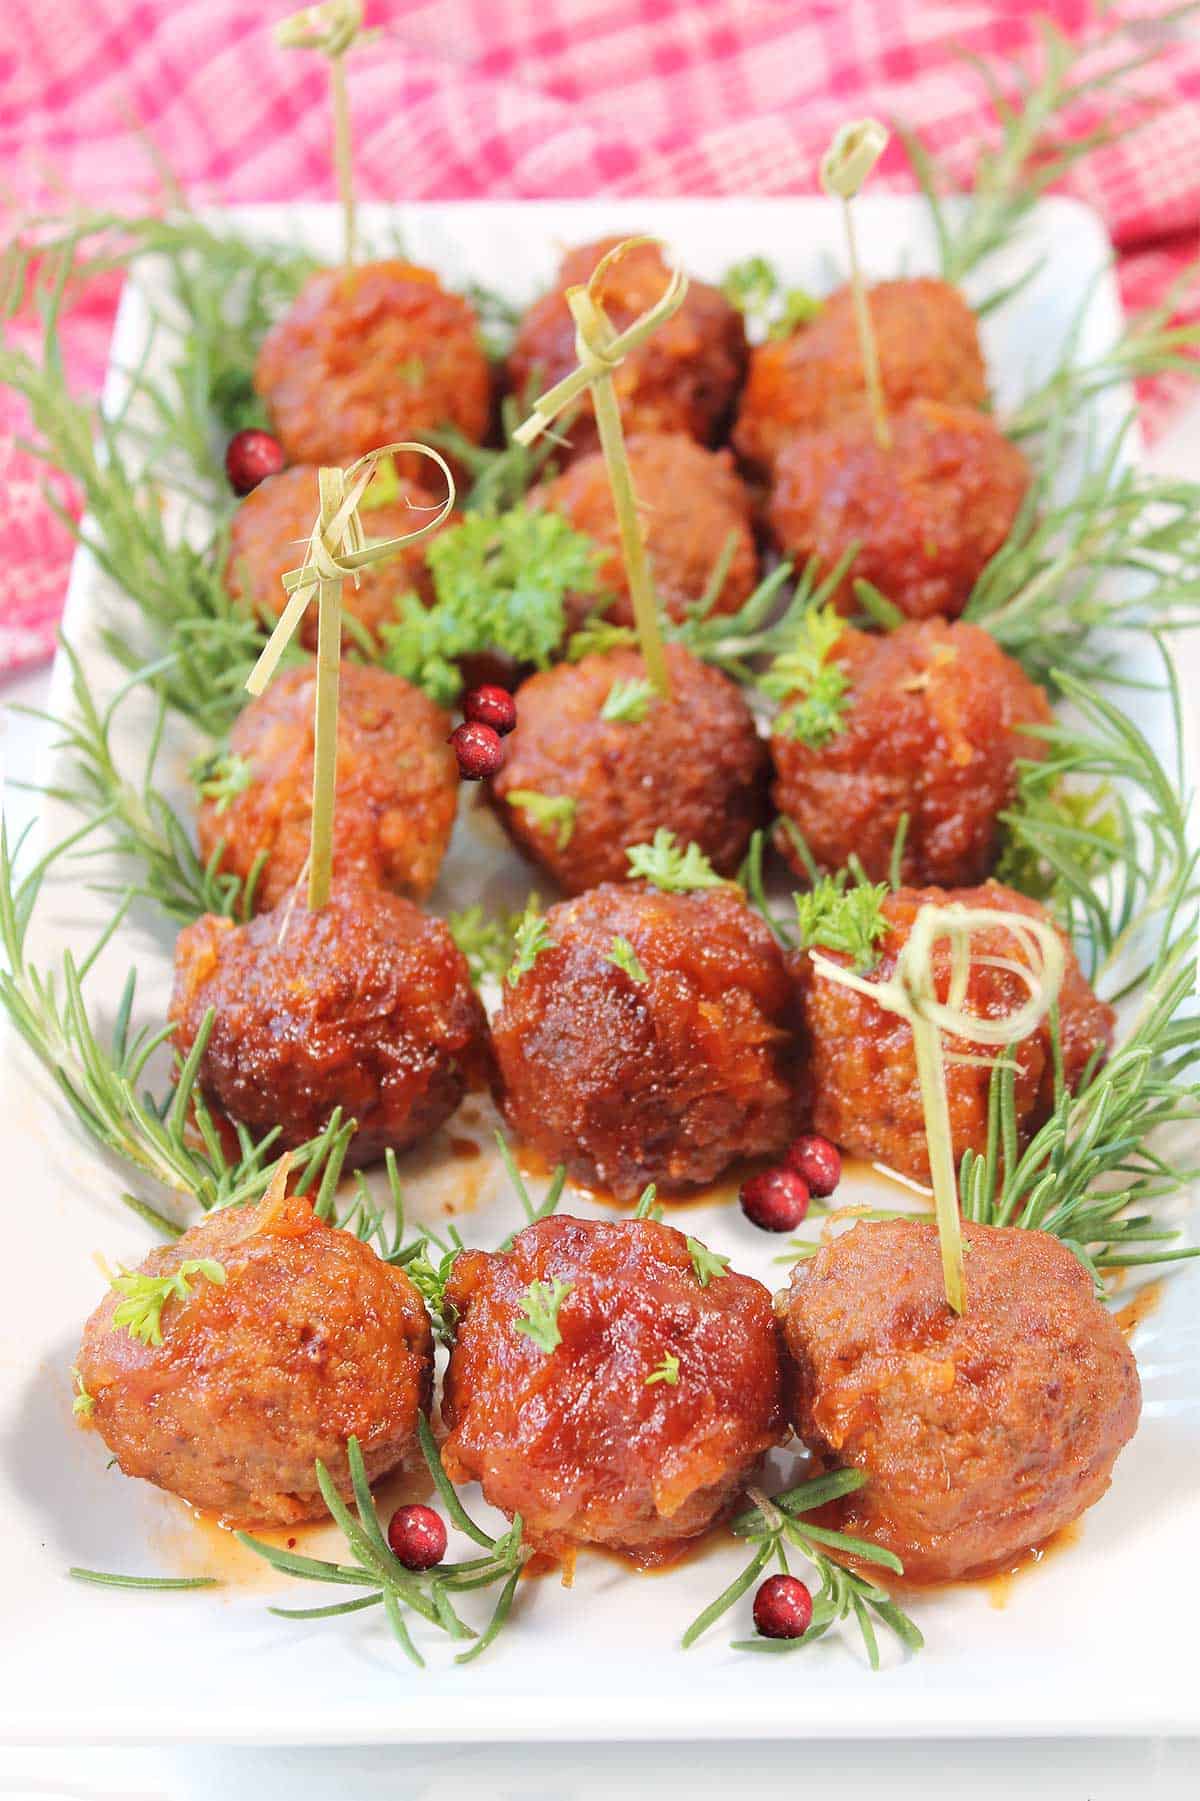 Cranberry meatballs with chili sauce on plate garnished with rosemary and cranberries.